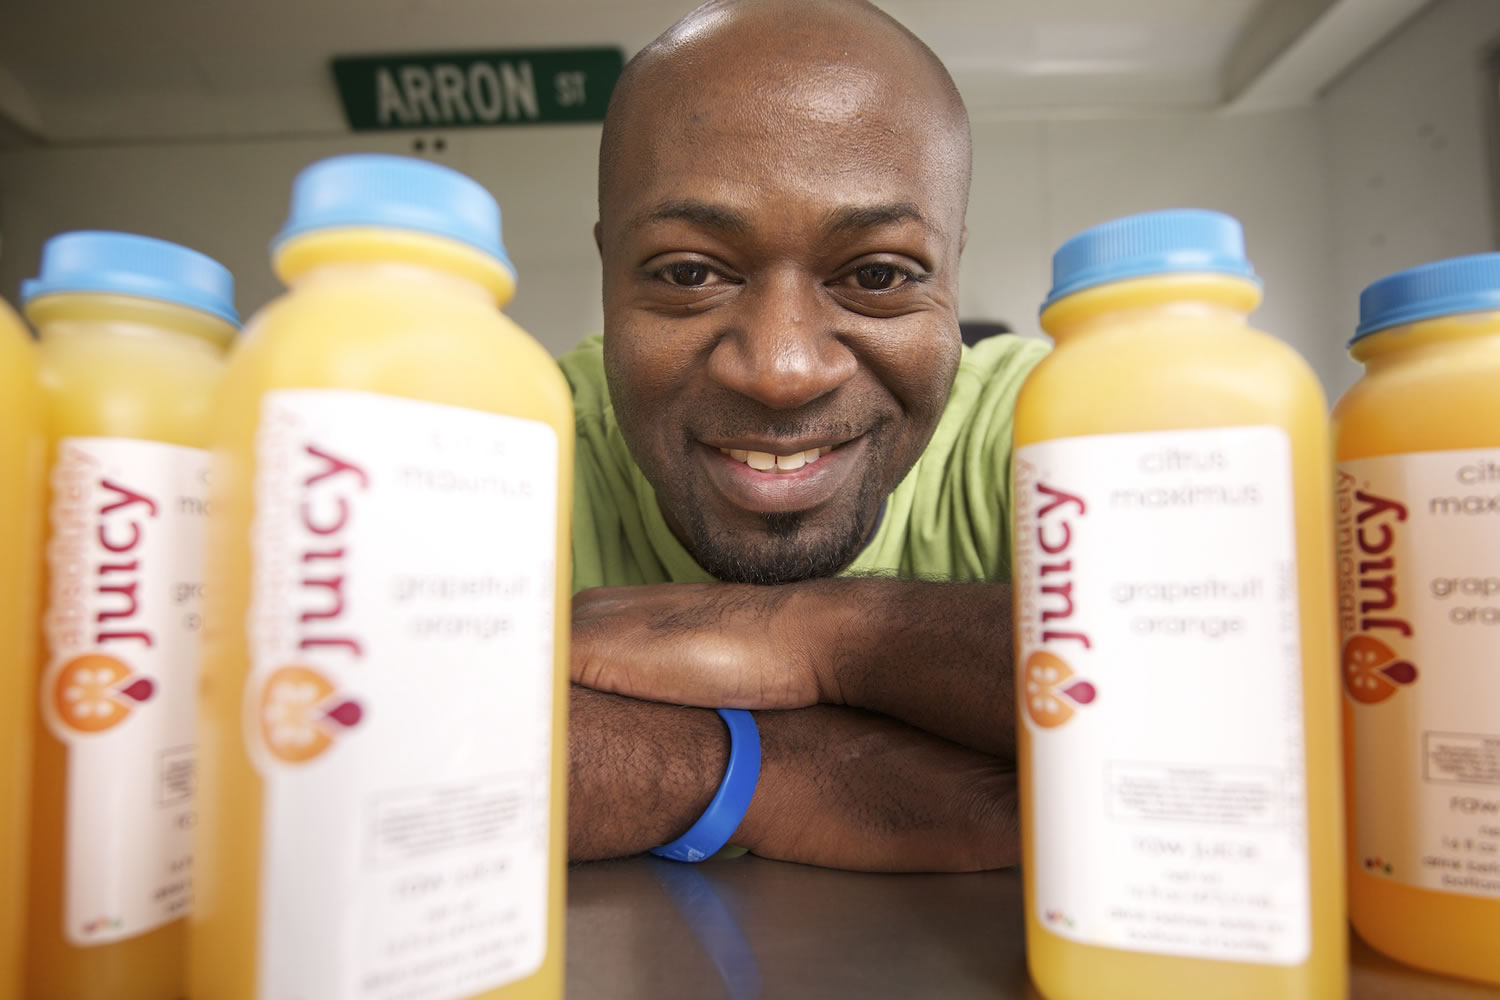 Arron Barnes, owner of Absolutely Juicy, started juicing about two years ago.